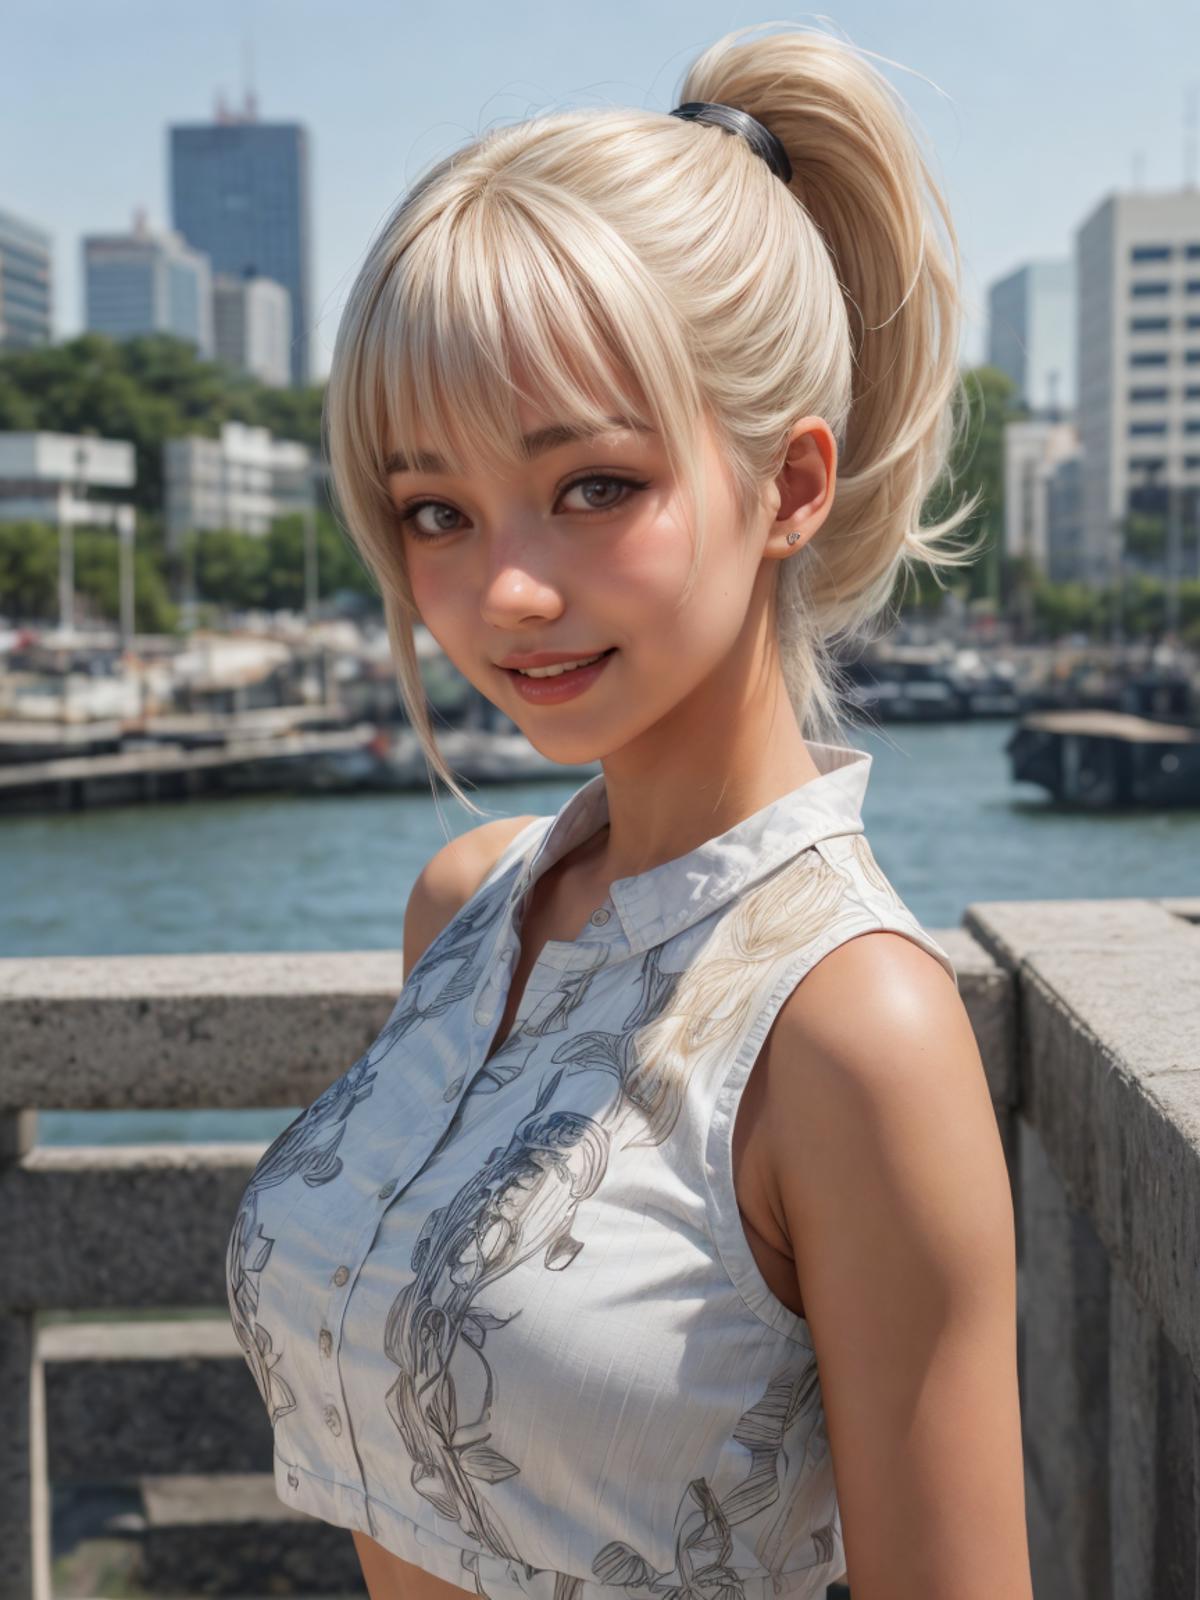 A pretty young girl with long blonde hair wearing a white top posing for a picture.